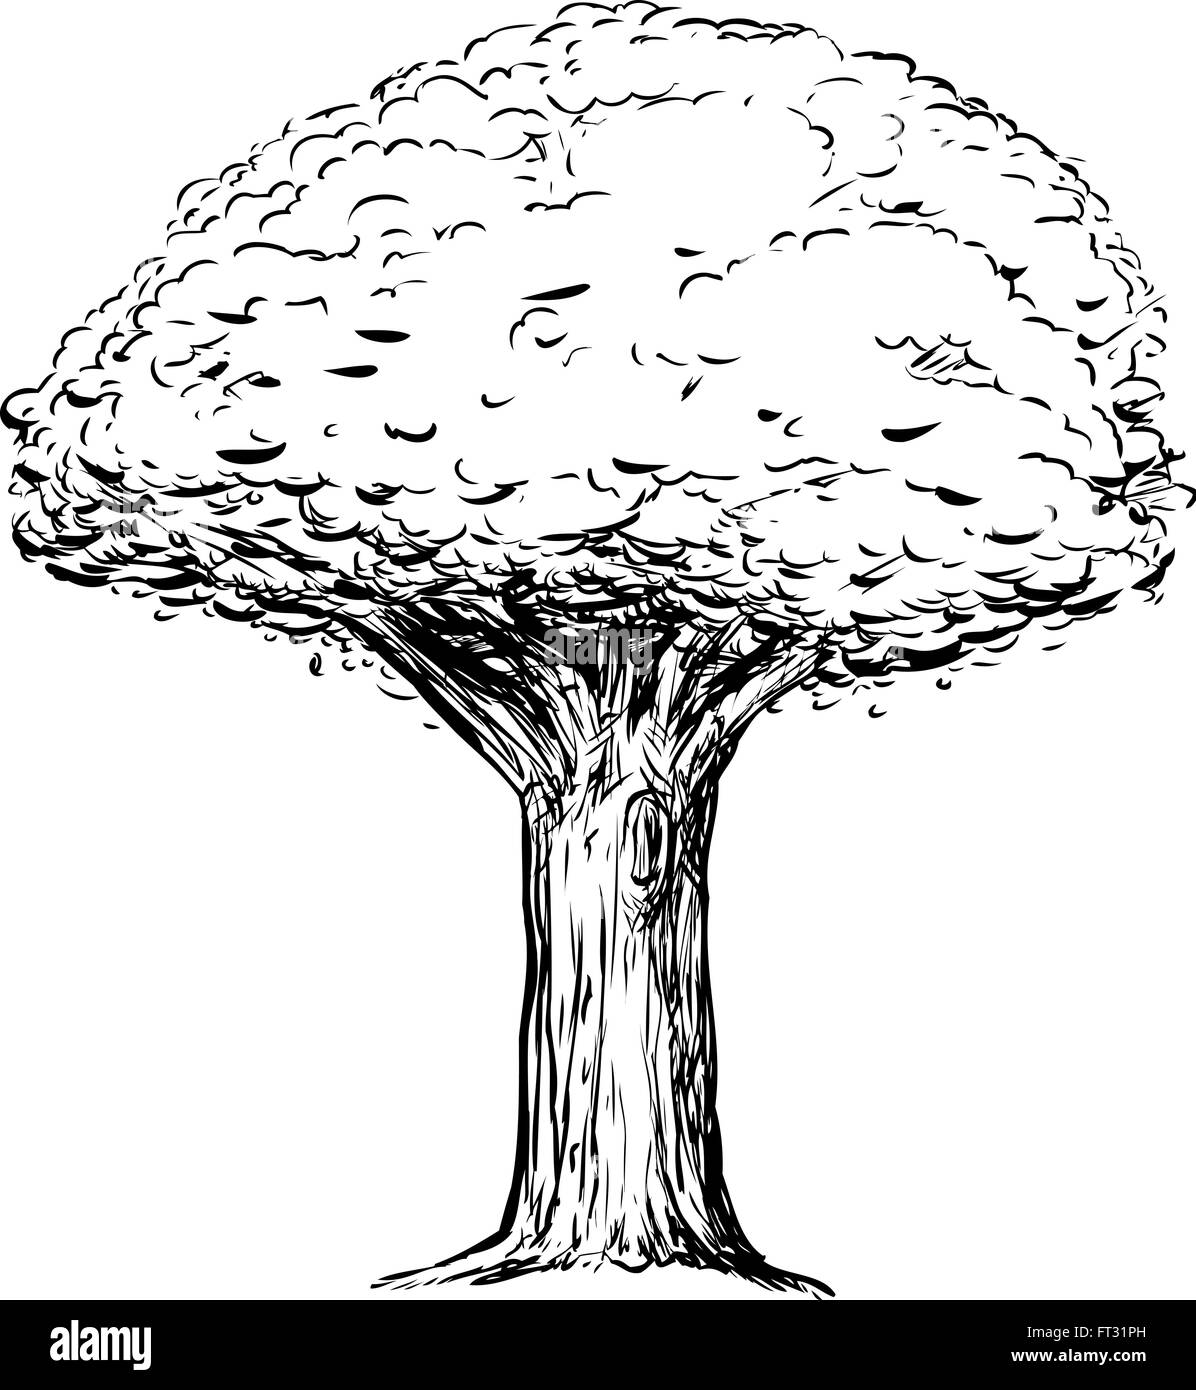 File:A hollow old tree trunk. Charcoal drawing. Wellcome V0043526.jpg -  Wikimedia Commons